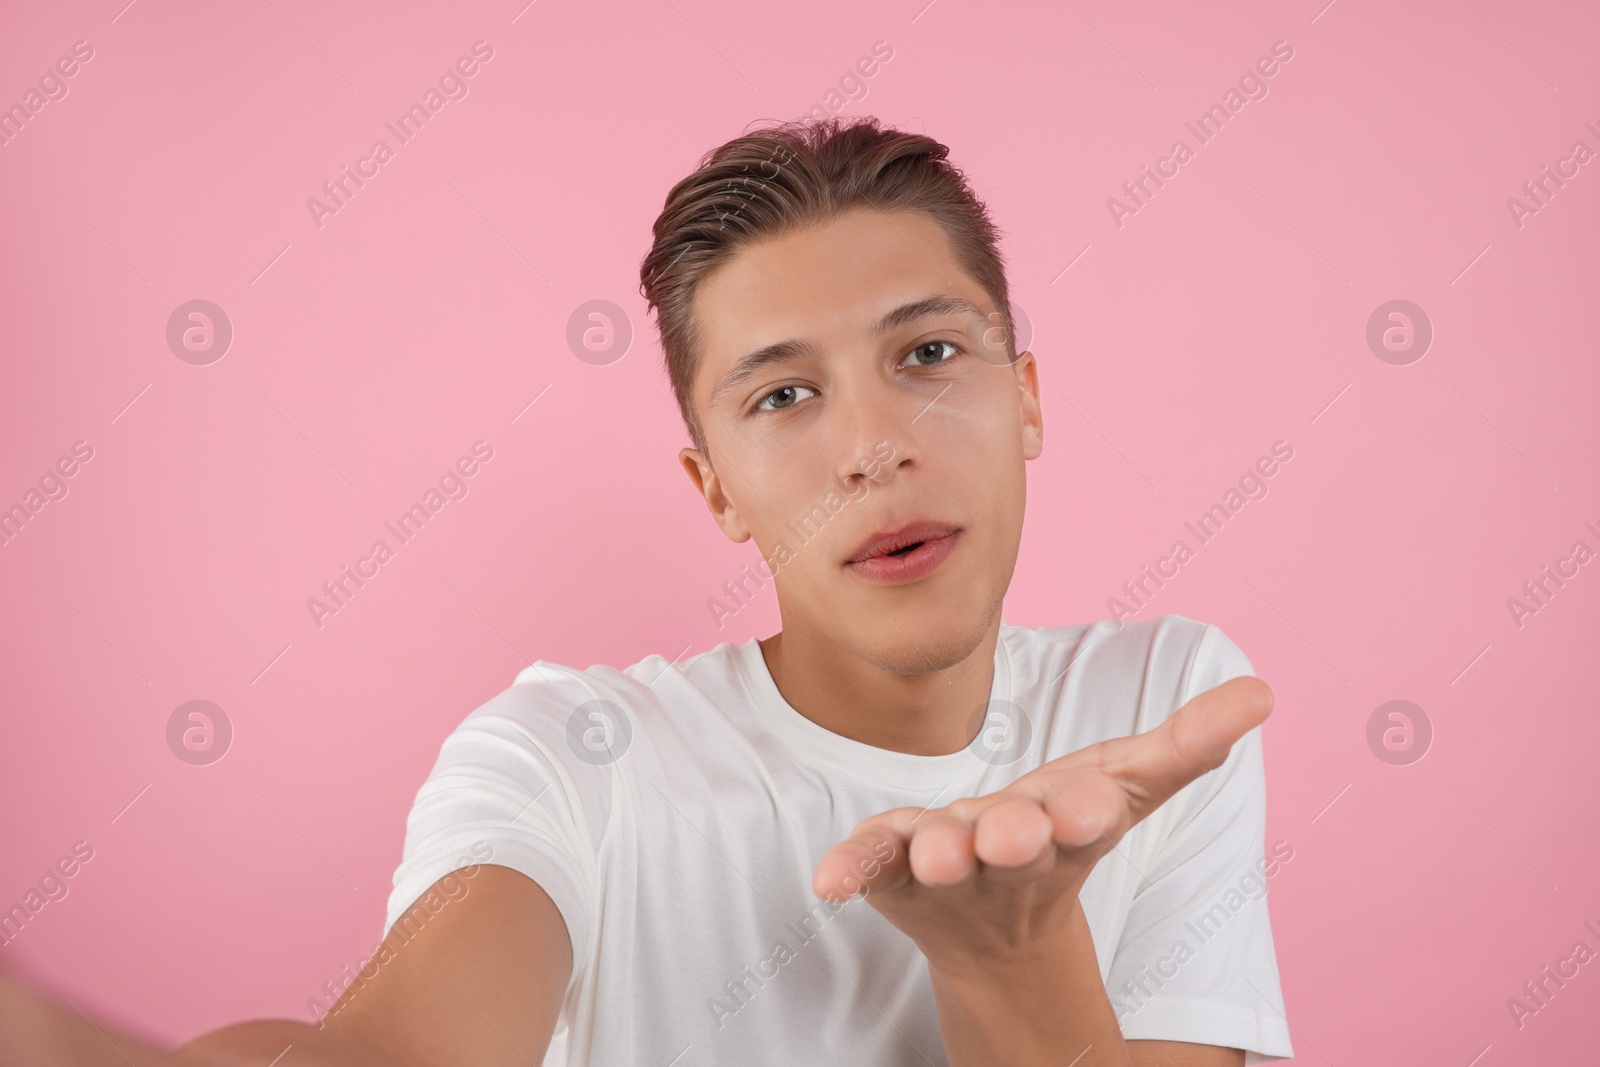 Photo of Handsome man taking selfie and blowing kiss on pink background